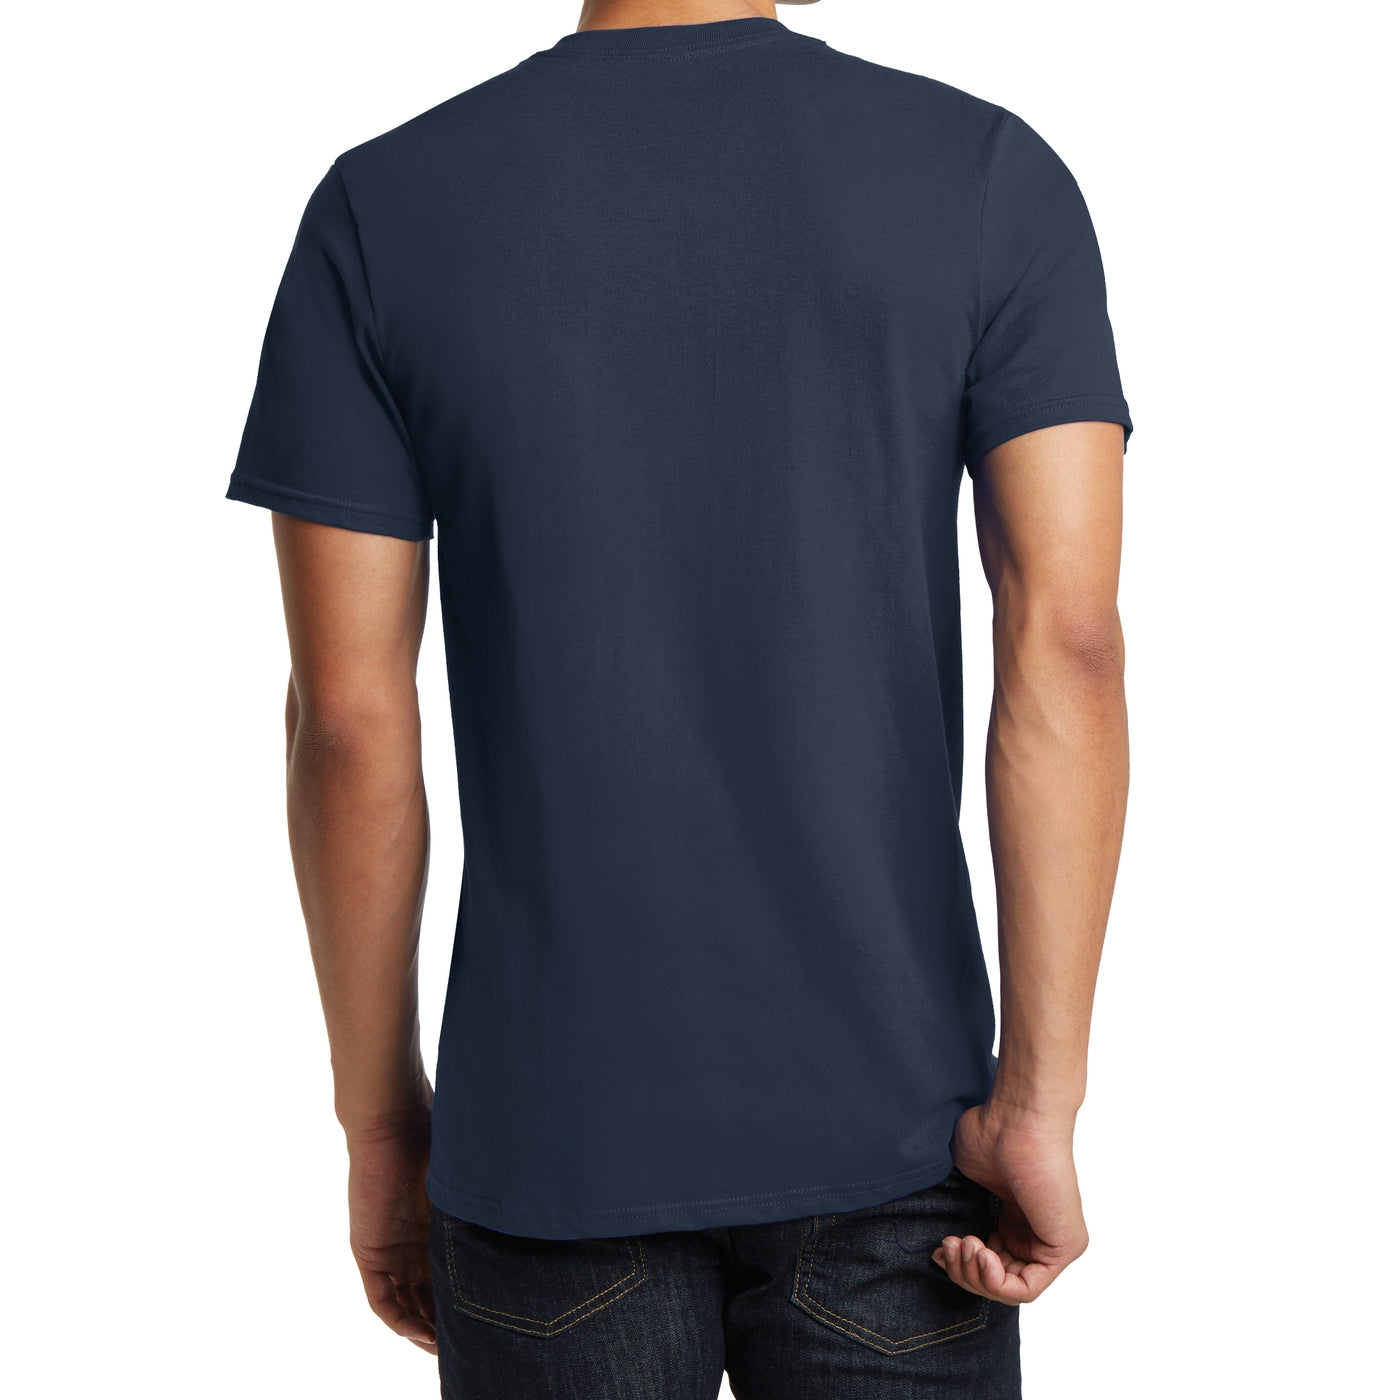 Men's Young The Concert Tee V-Neck - New Navy